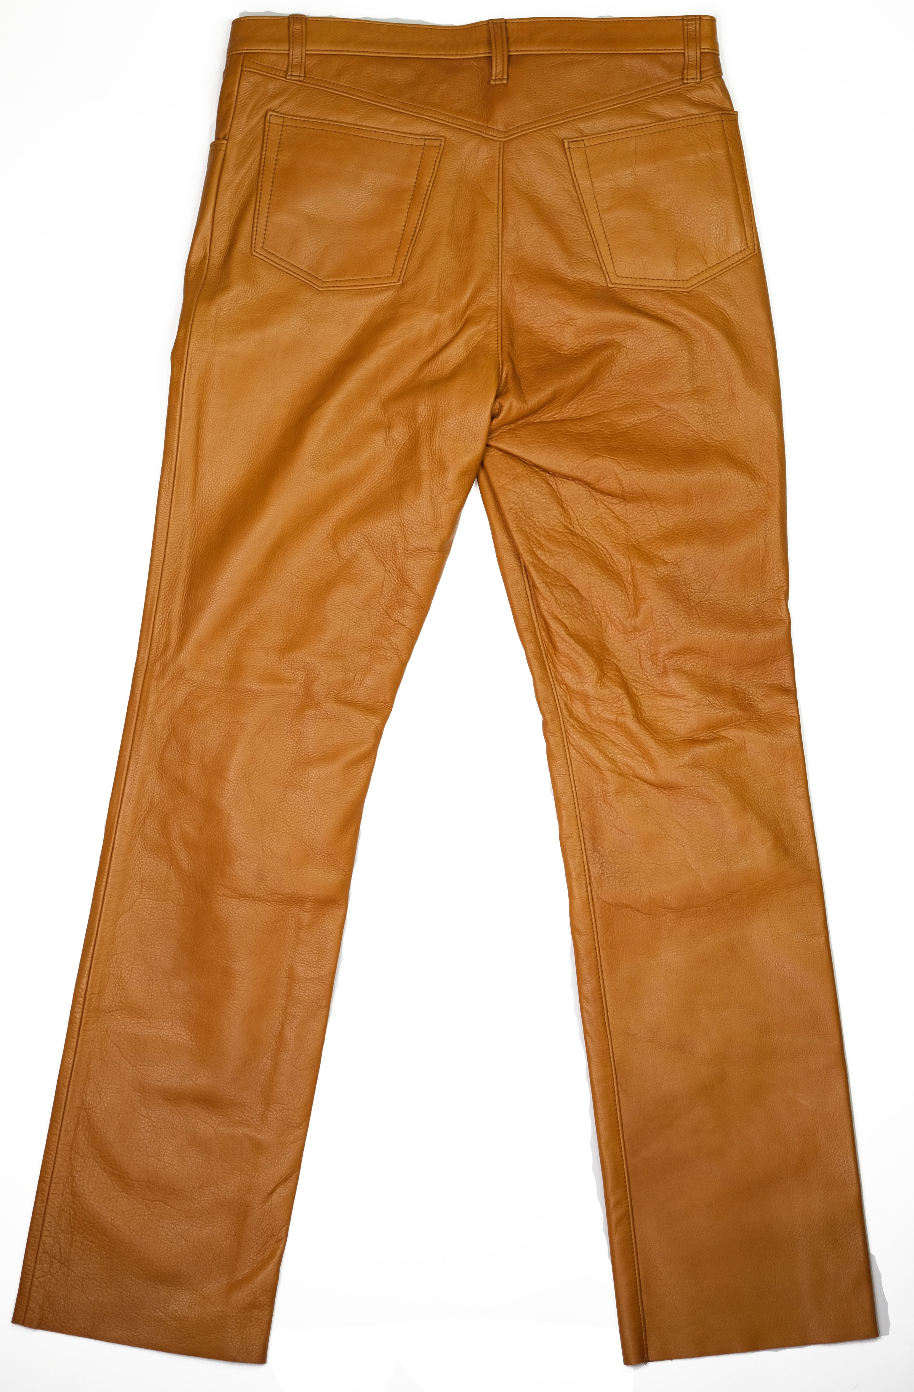 BROWN LEATHER PANTS